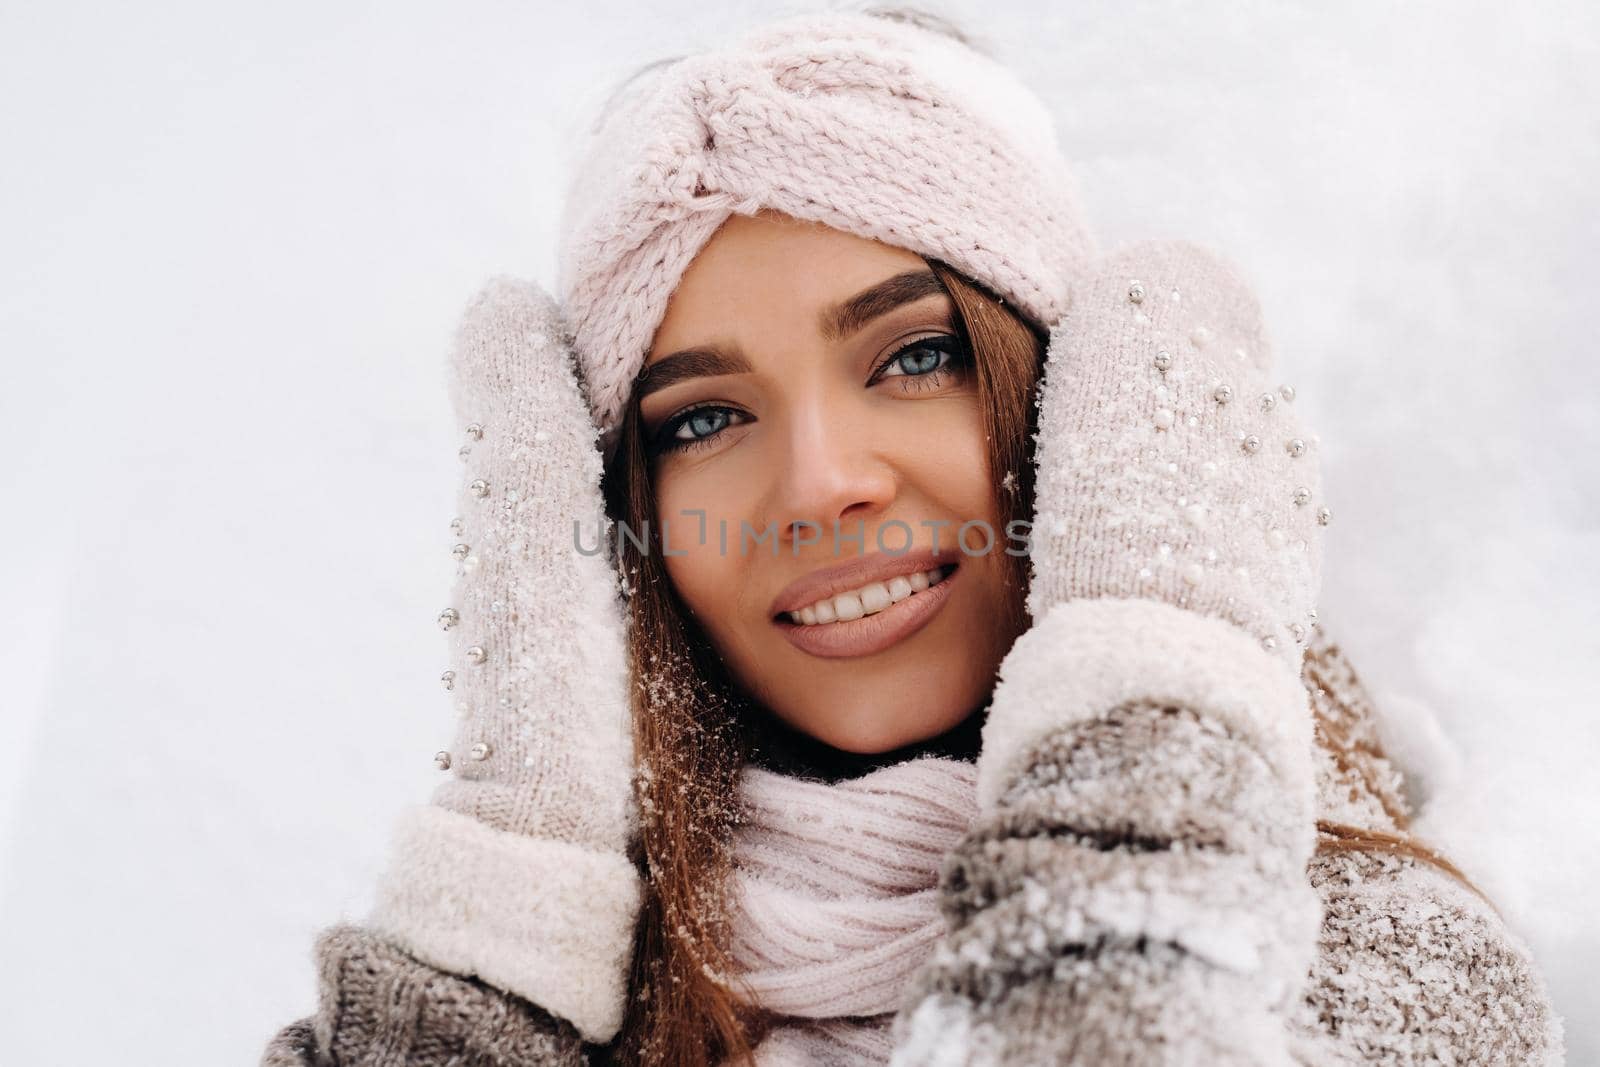 A girl in a sweater and mittens in winter stands on a snow-covered background.